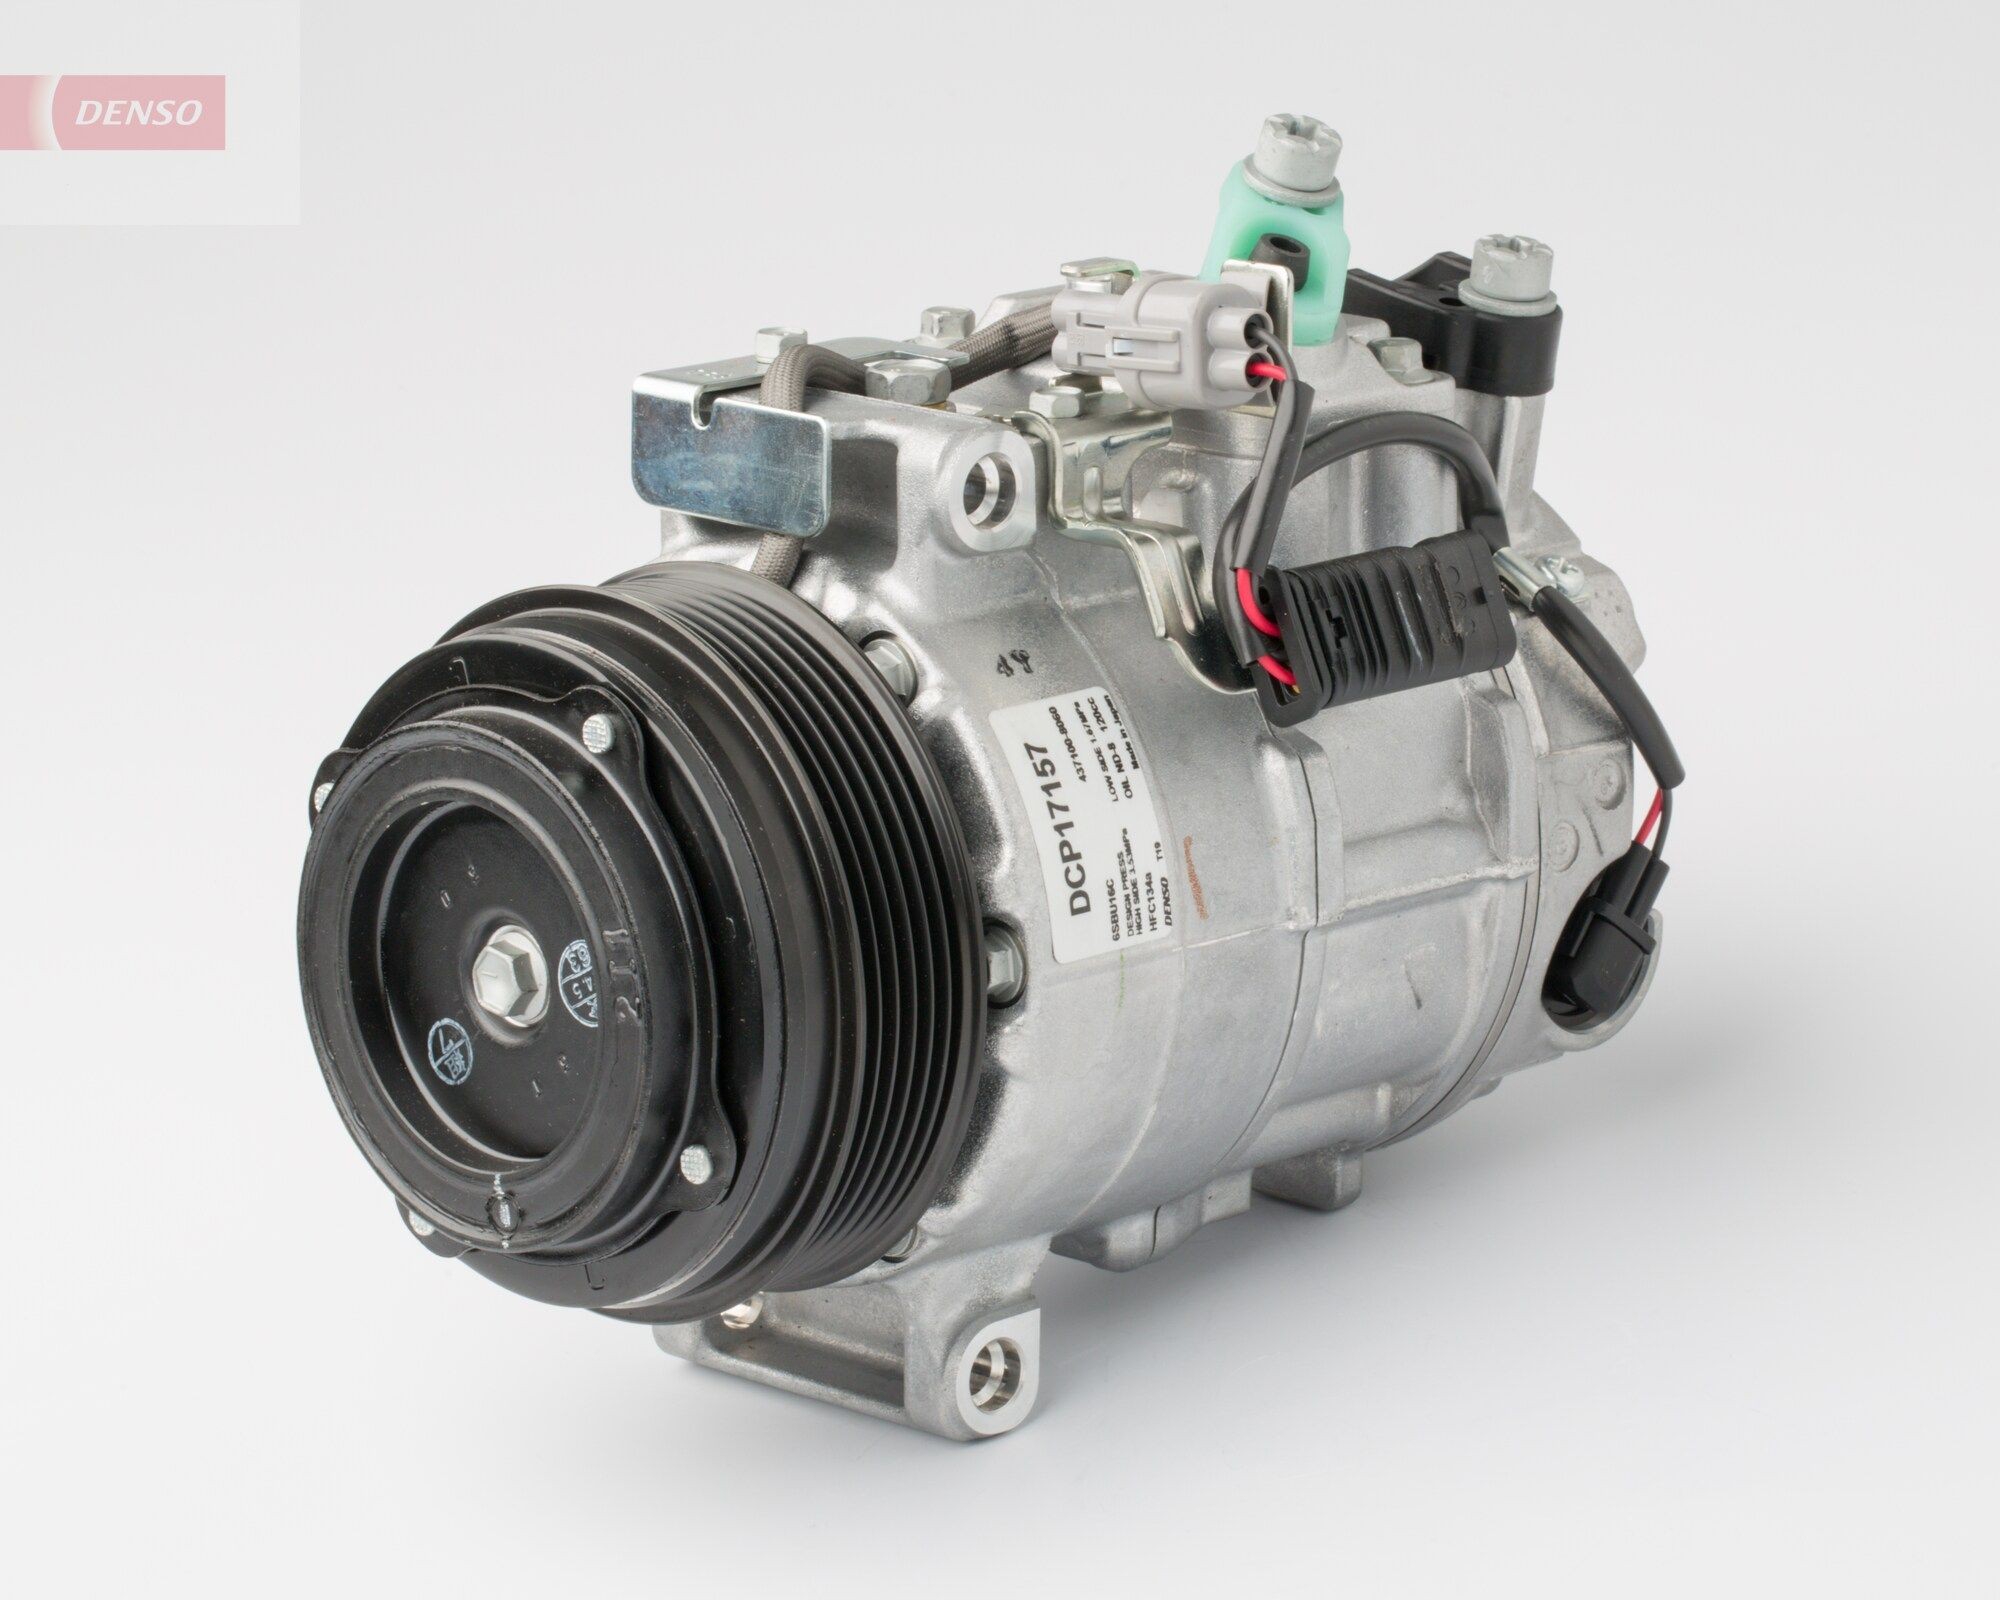 DENSO DCP17157 Air conditioning compressor 002 230 92 11